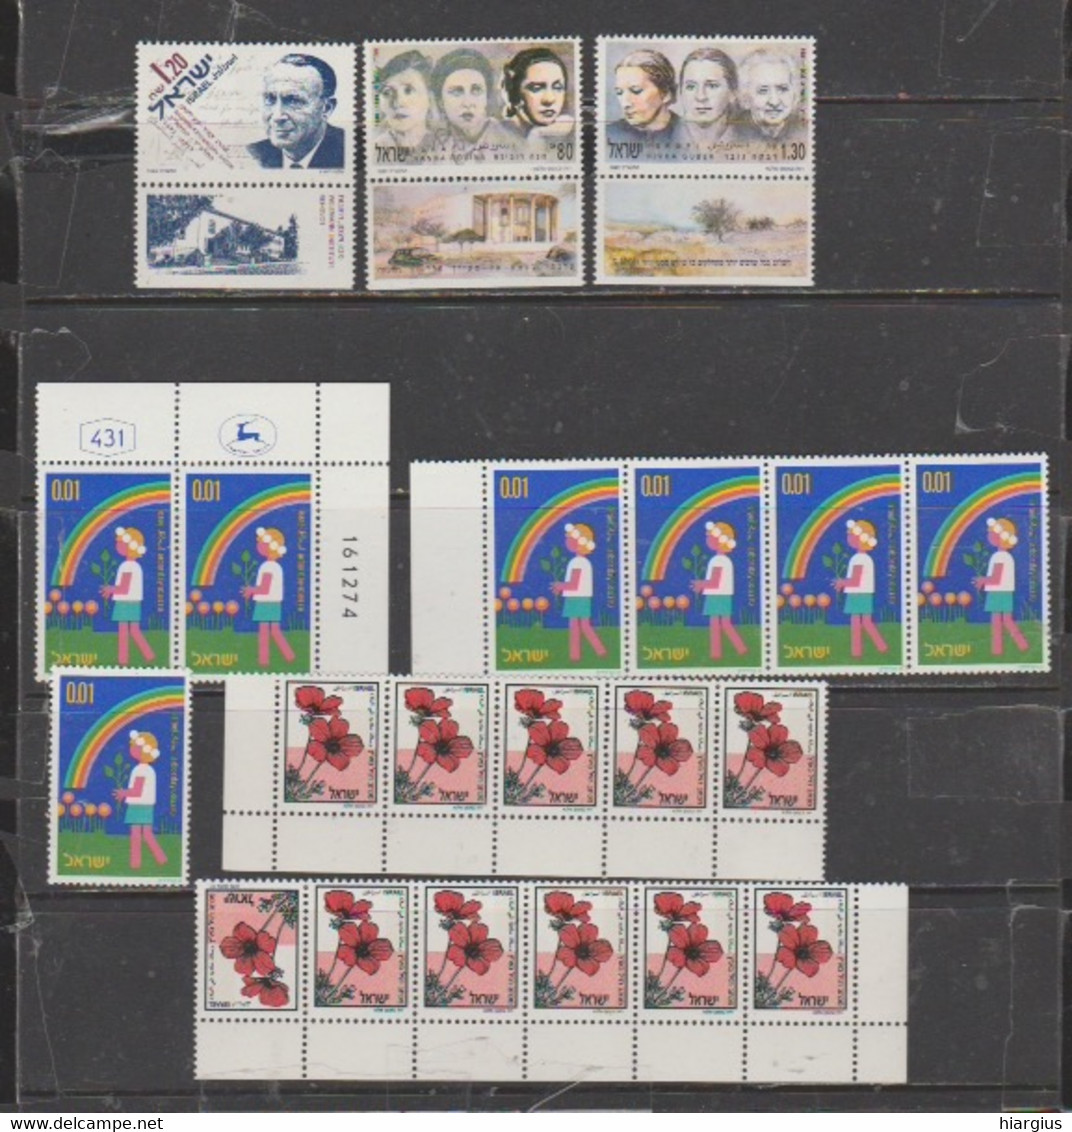 ISRAEL-MNH collection 1948-1986.